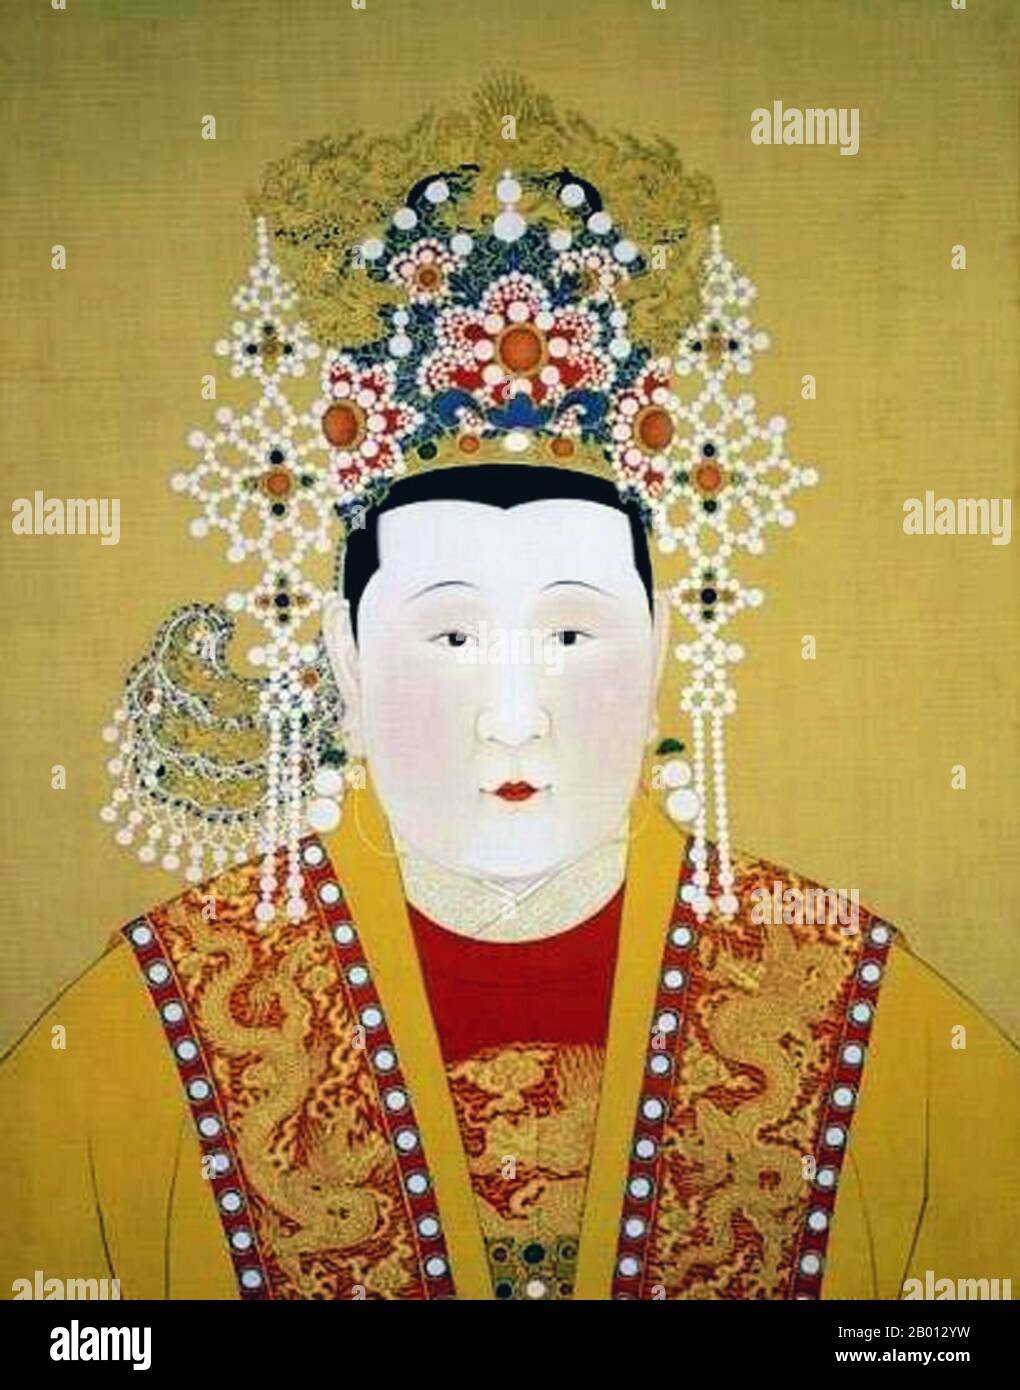 China: Empress Xiao Gong Zhang (1403 - 4 September 1462), consort of the 5th Ming Emperor Xuande (r. 1425-1435). Hanging scroll painting, 15th-17th century.  Empress Sun (1403-1462), formally Empress Xiaogongzhang, was consort of the Xuande Emperor of the Ming Dynasty. She became Empress Dowager when Xuande sudddenly died in 1435, and her son became the Yingzong Emperor. She vied with her mother-in-law, Empress Dowager Zhang, for influence but was initially sidelined. Her son led a disastrous campaign that saw hundreds of thousands of Ming soldiers killed and himself captured by the Mongols. Stock Photo